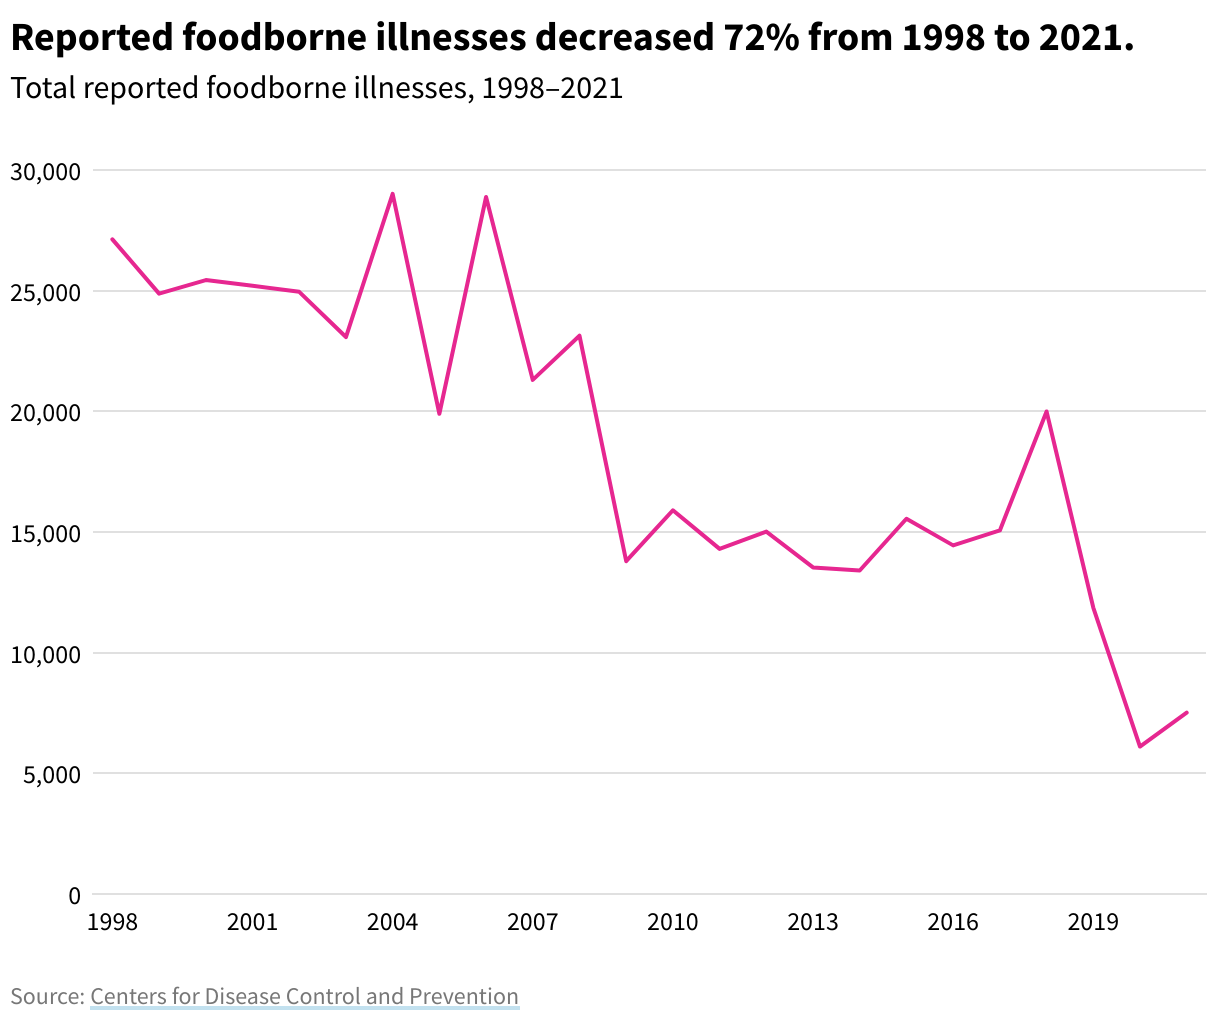 A line chart shows the total reported foodborne illnesses from 1998 to 2021. 